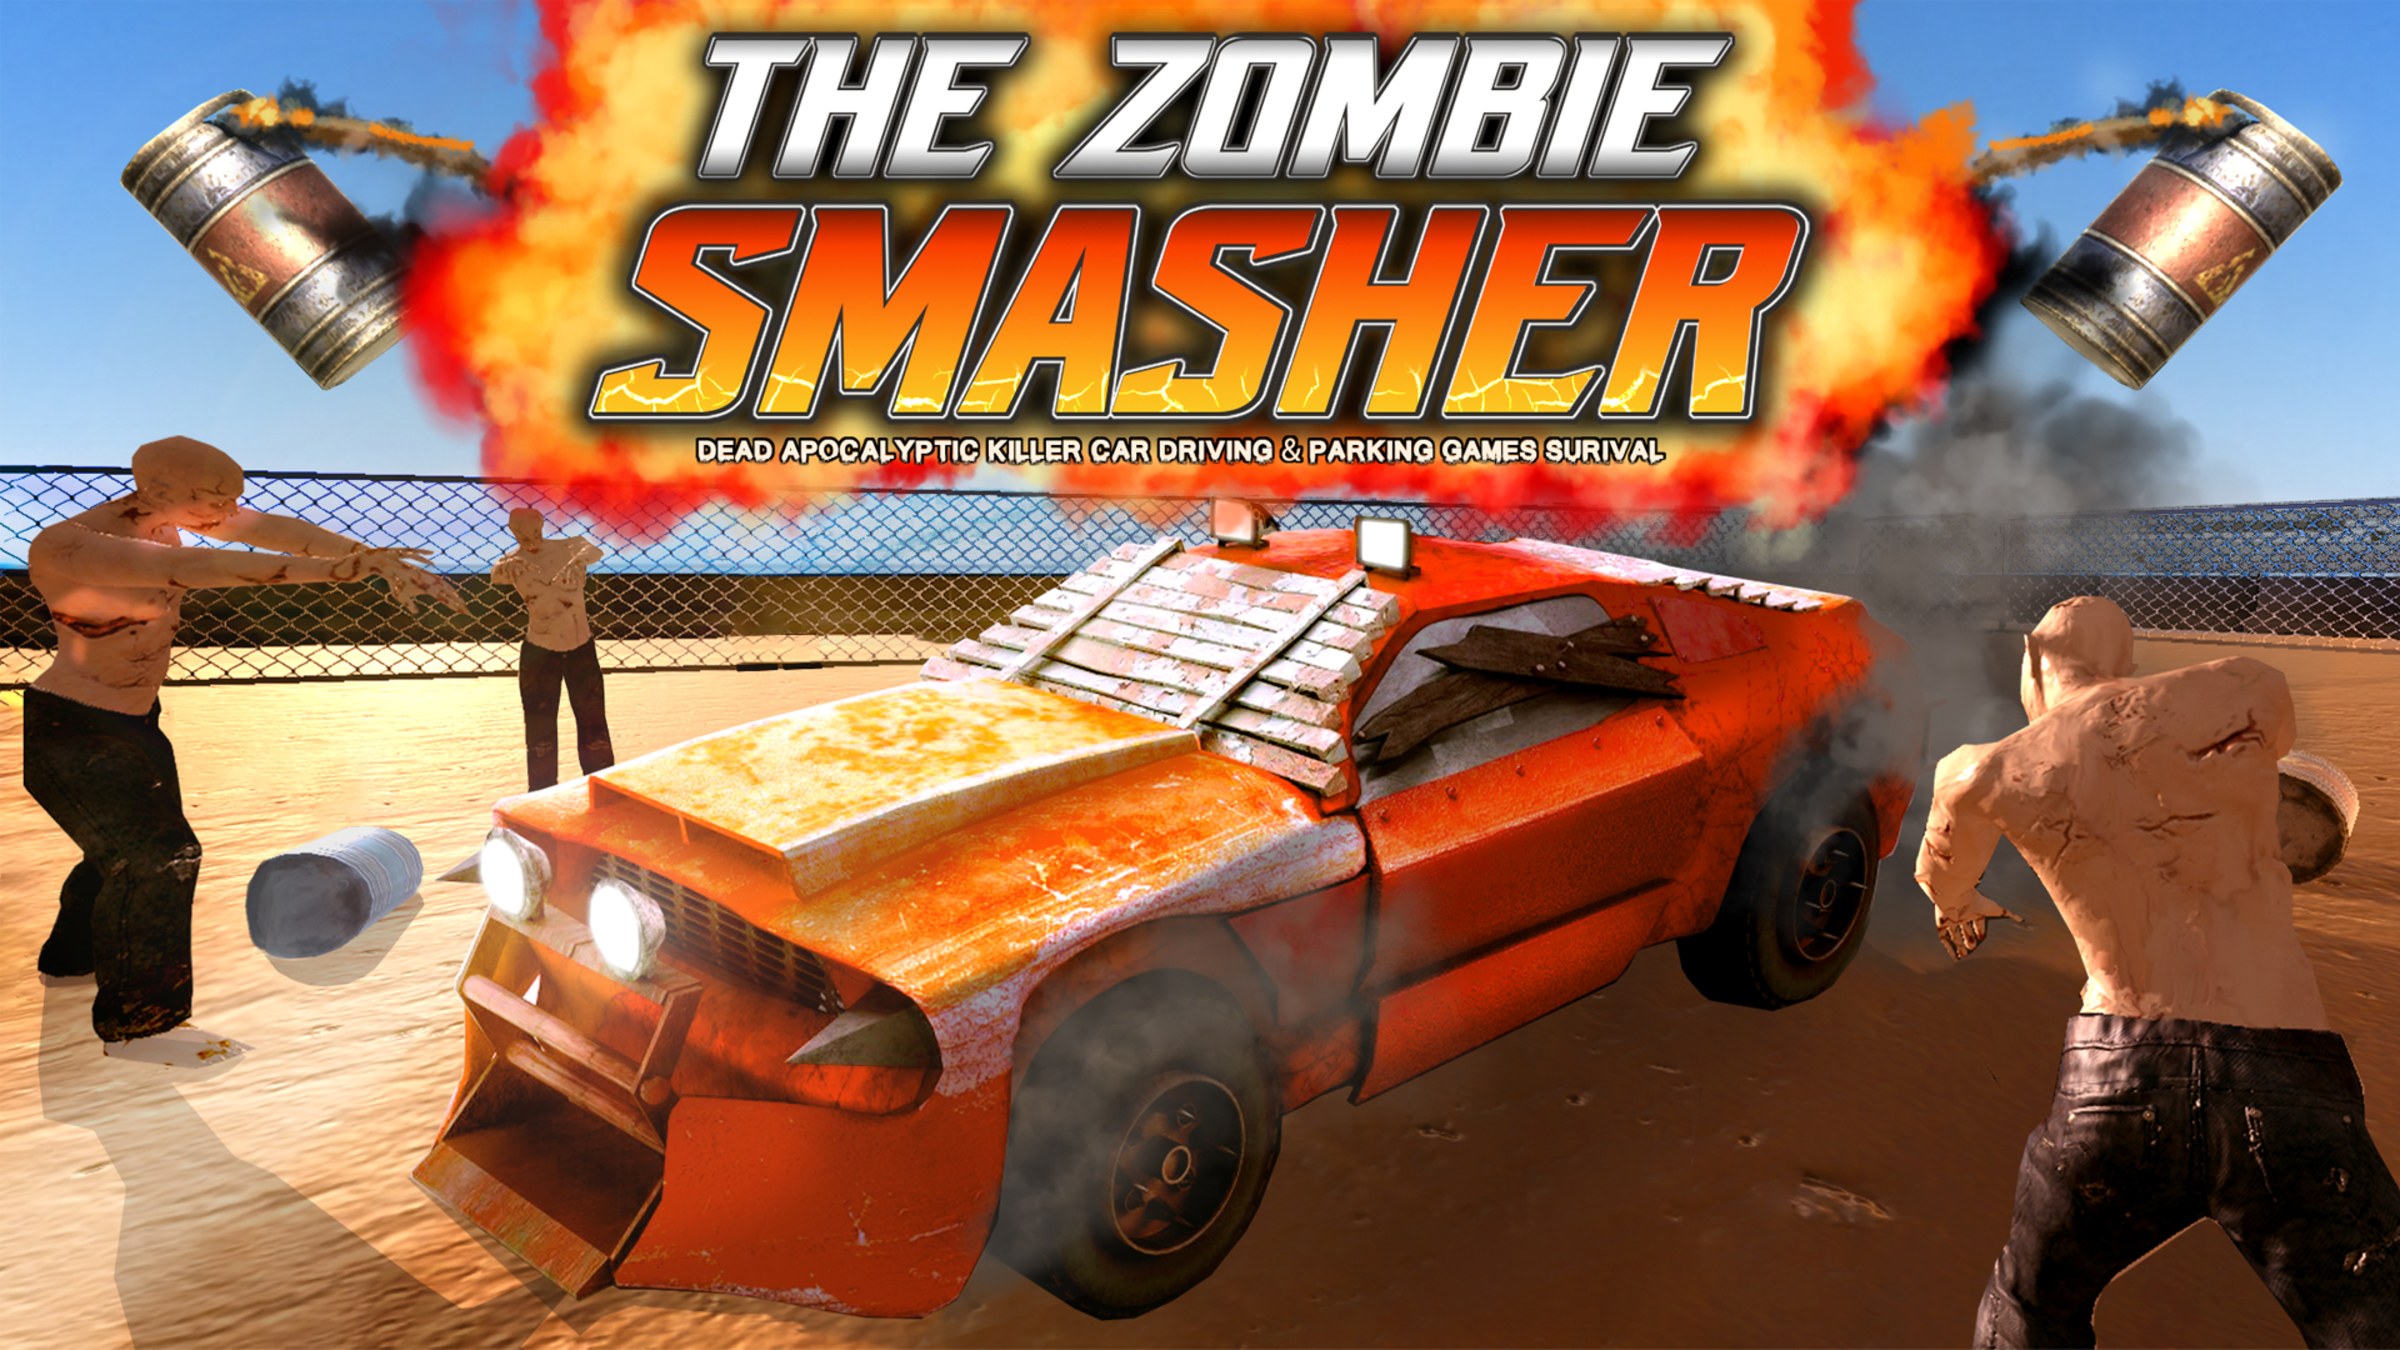 ZOMBIE DERBY - Play Online for Free!